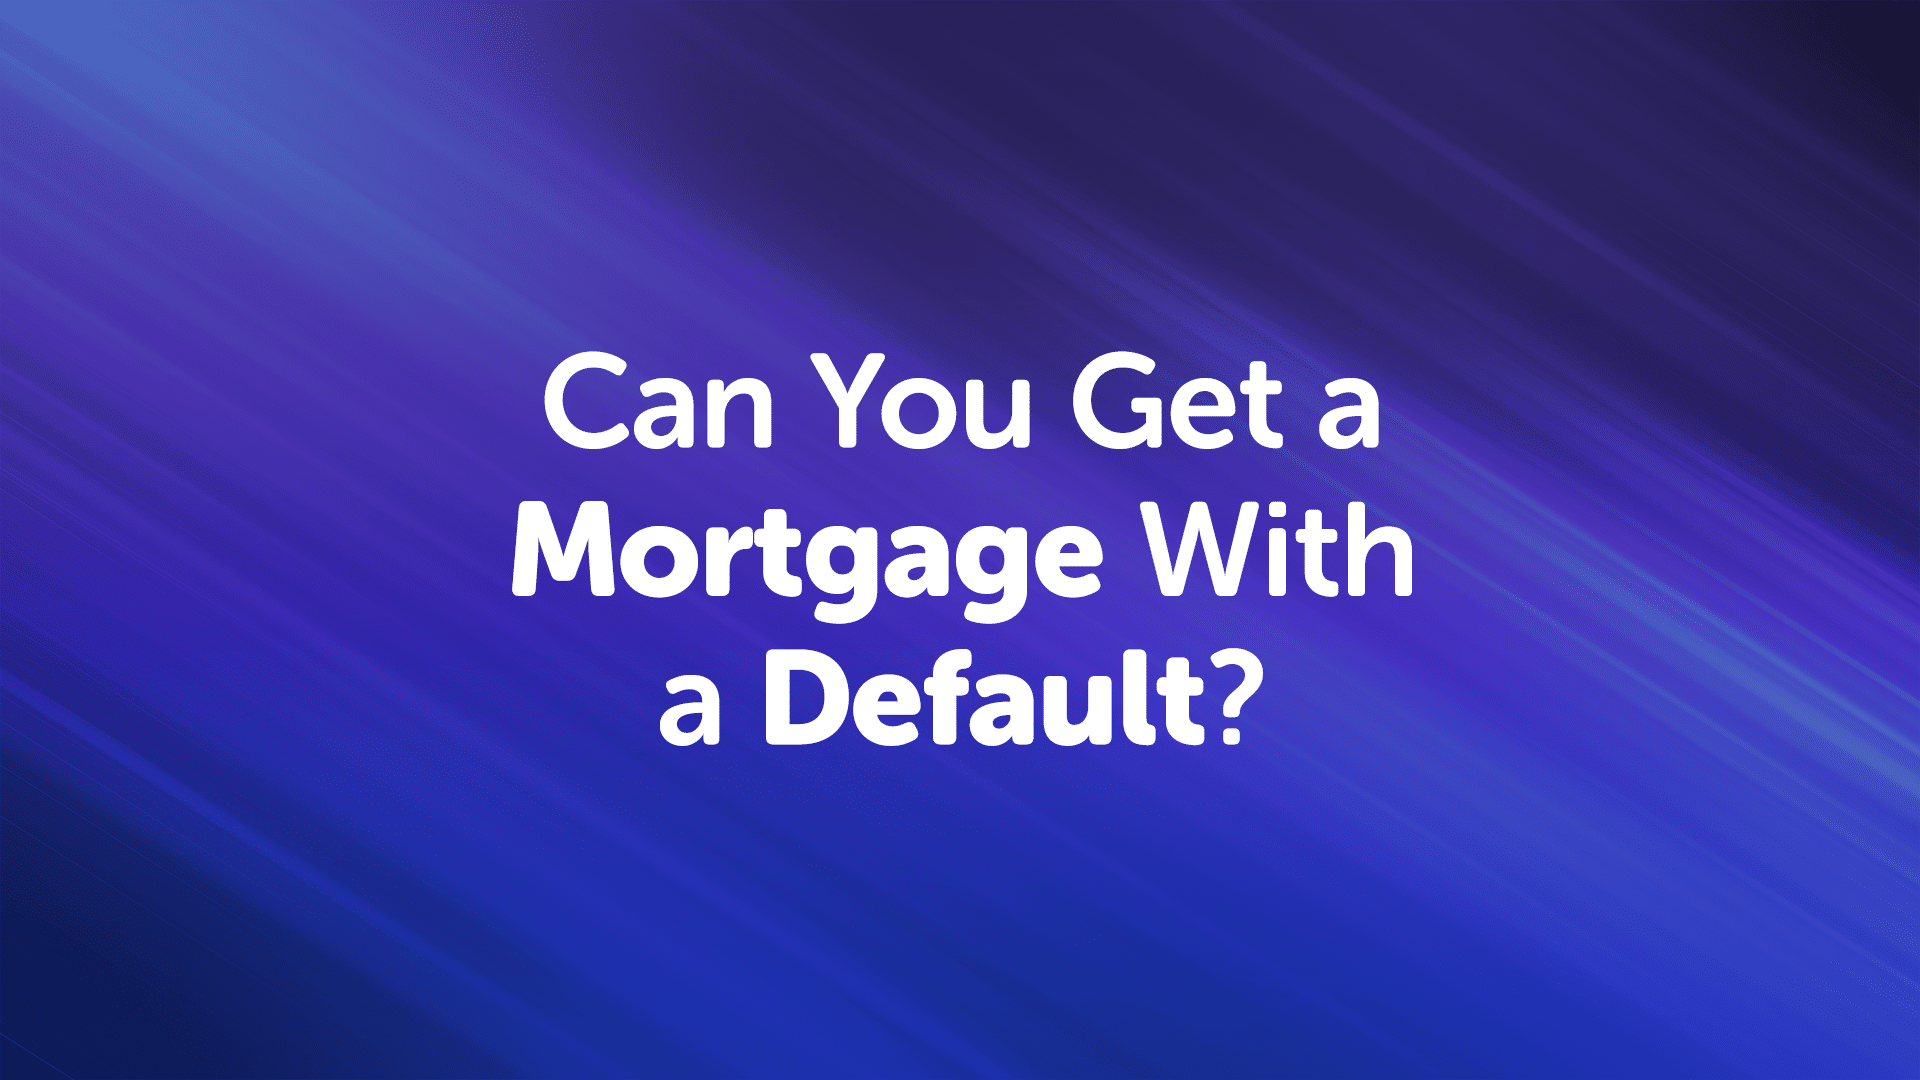 Mortgage With a Default